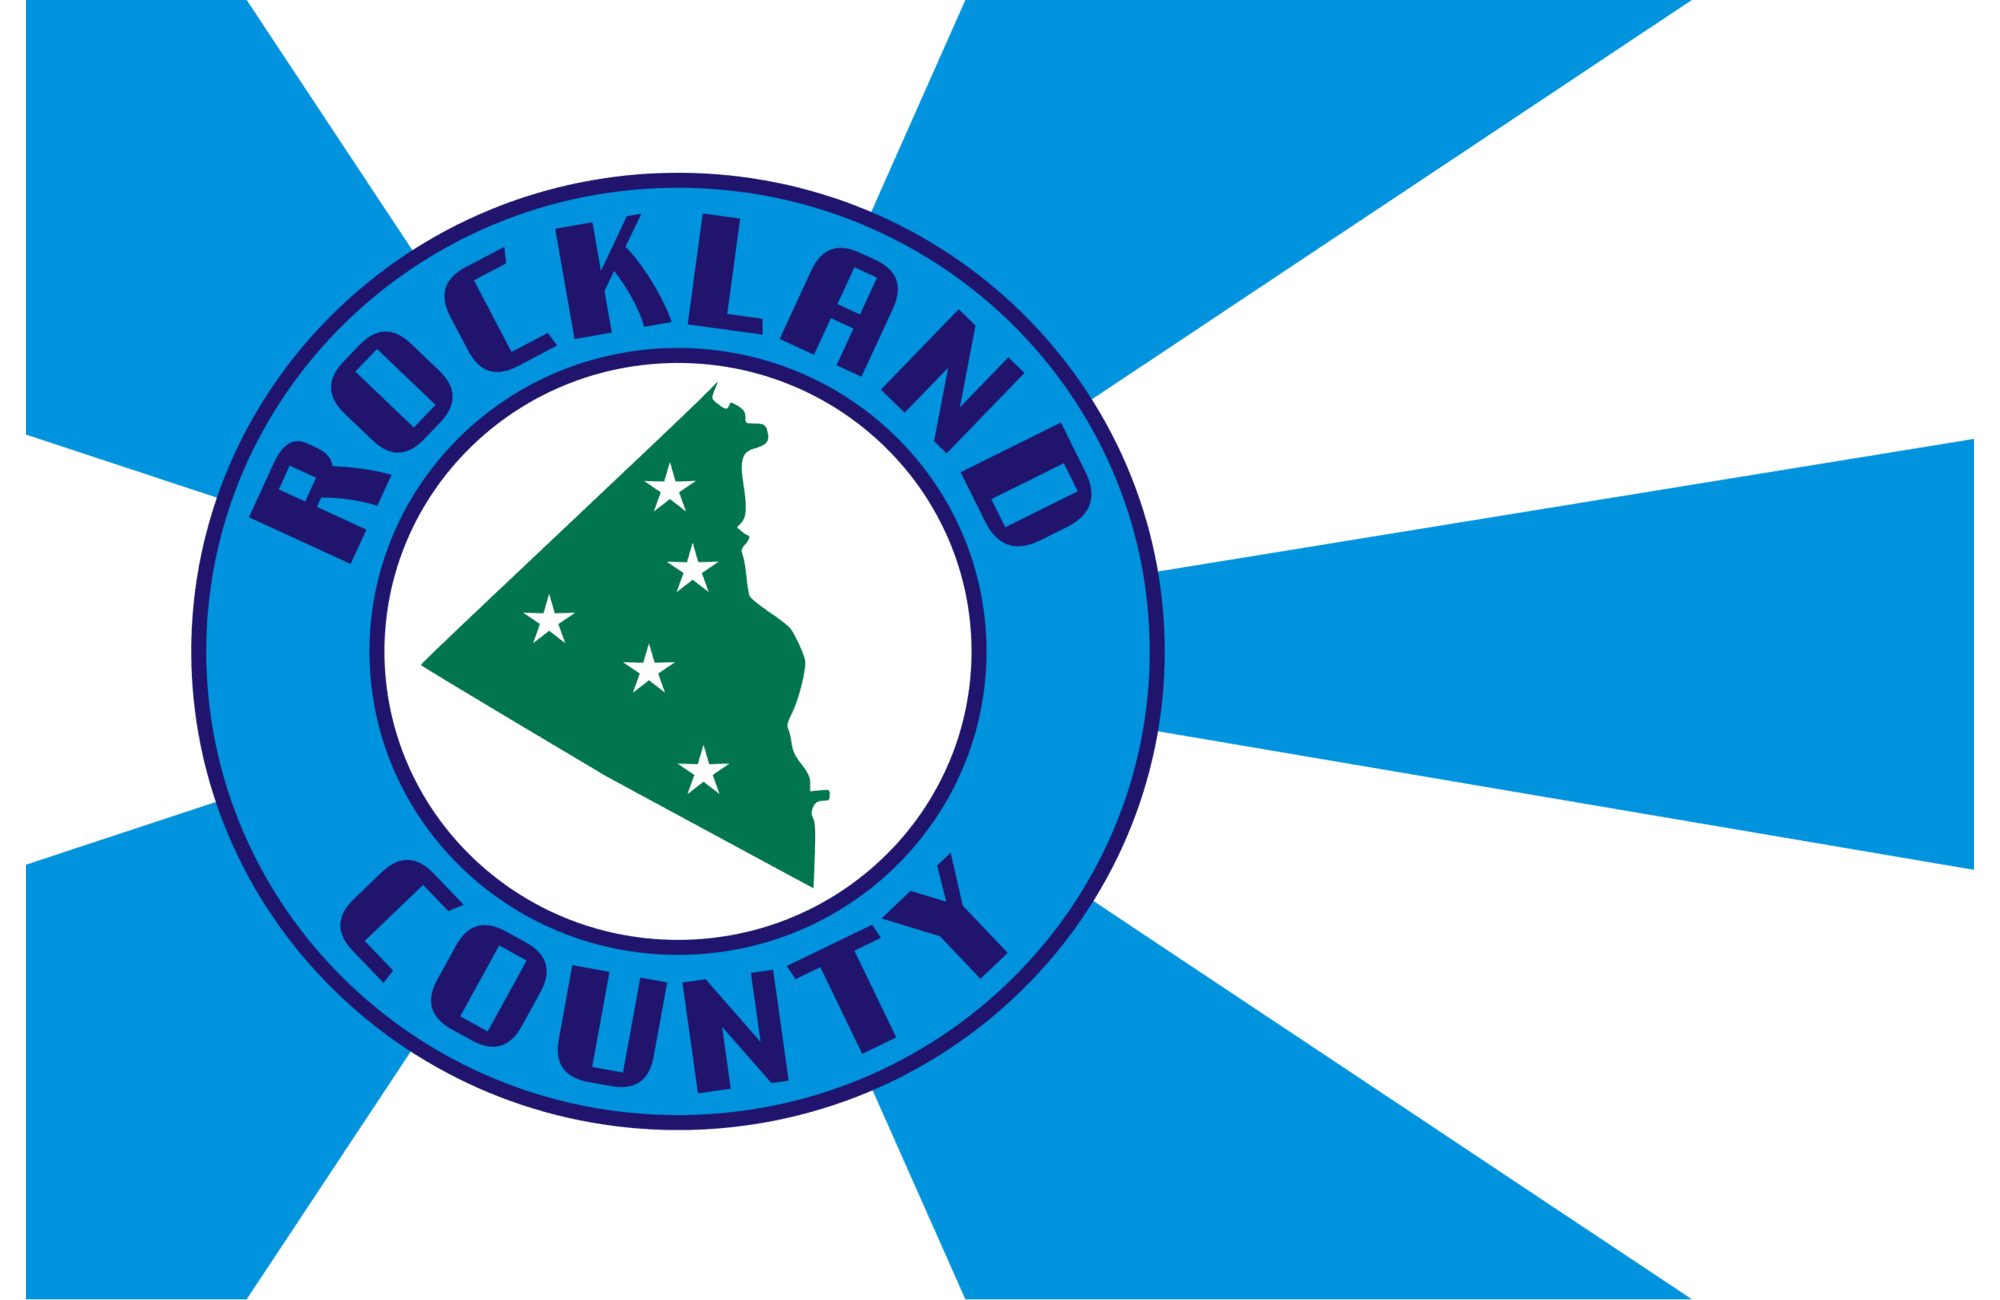 Rockland County 